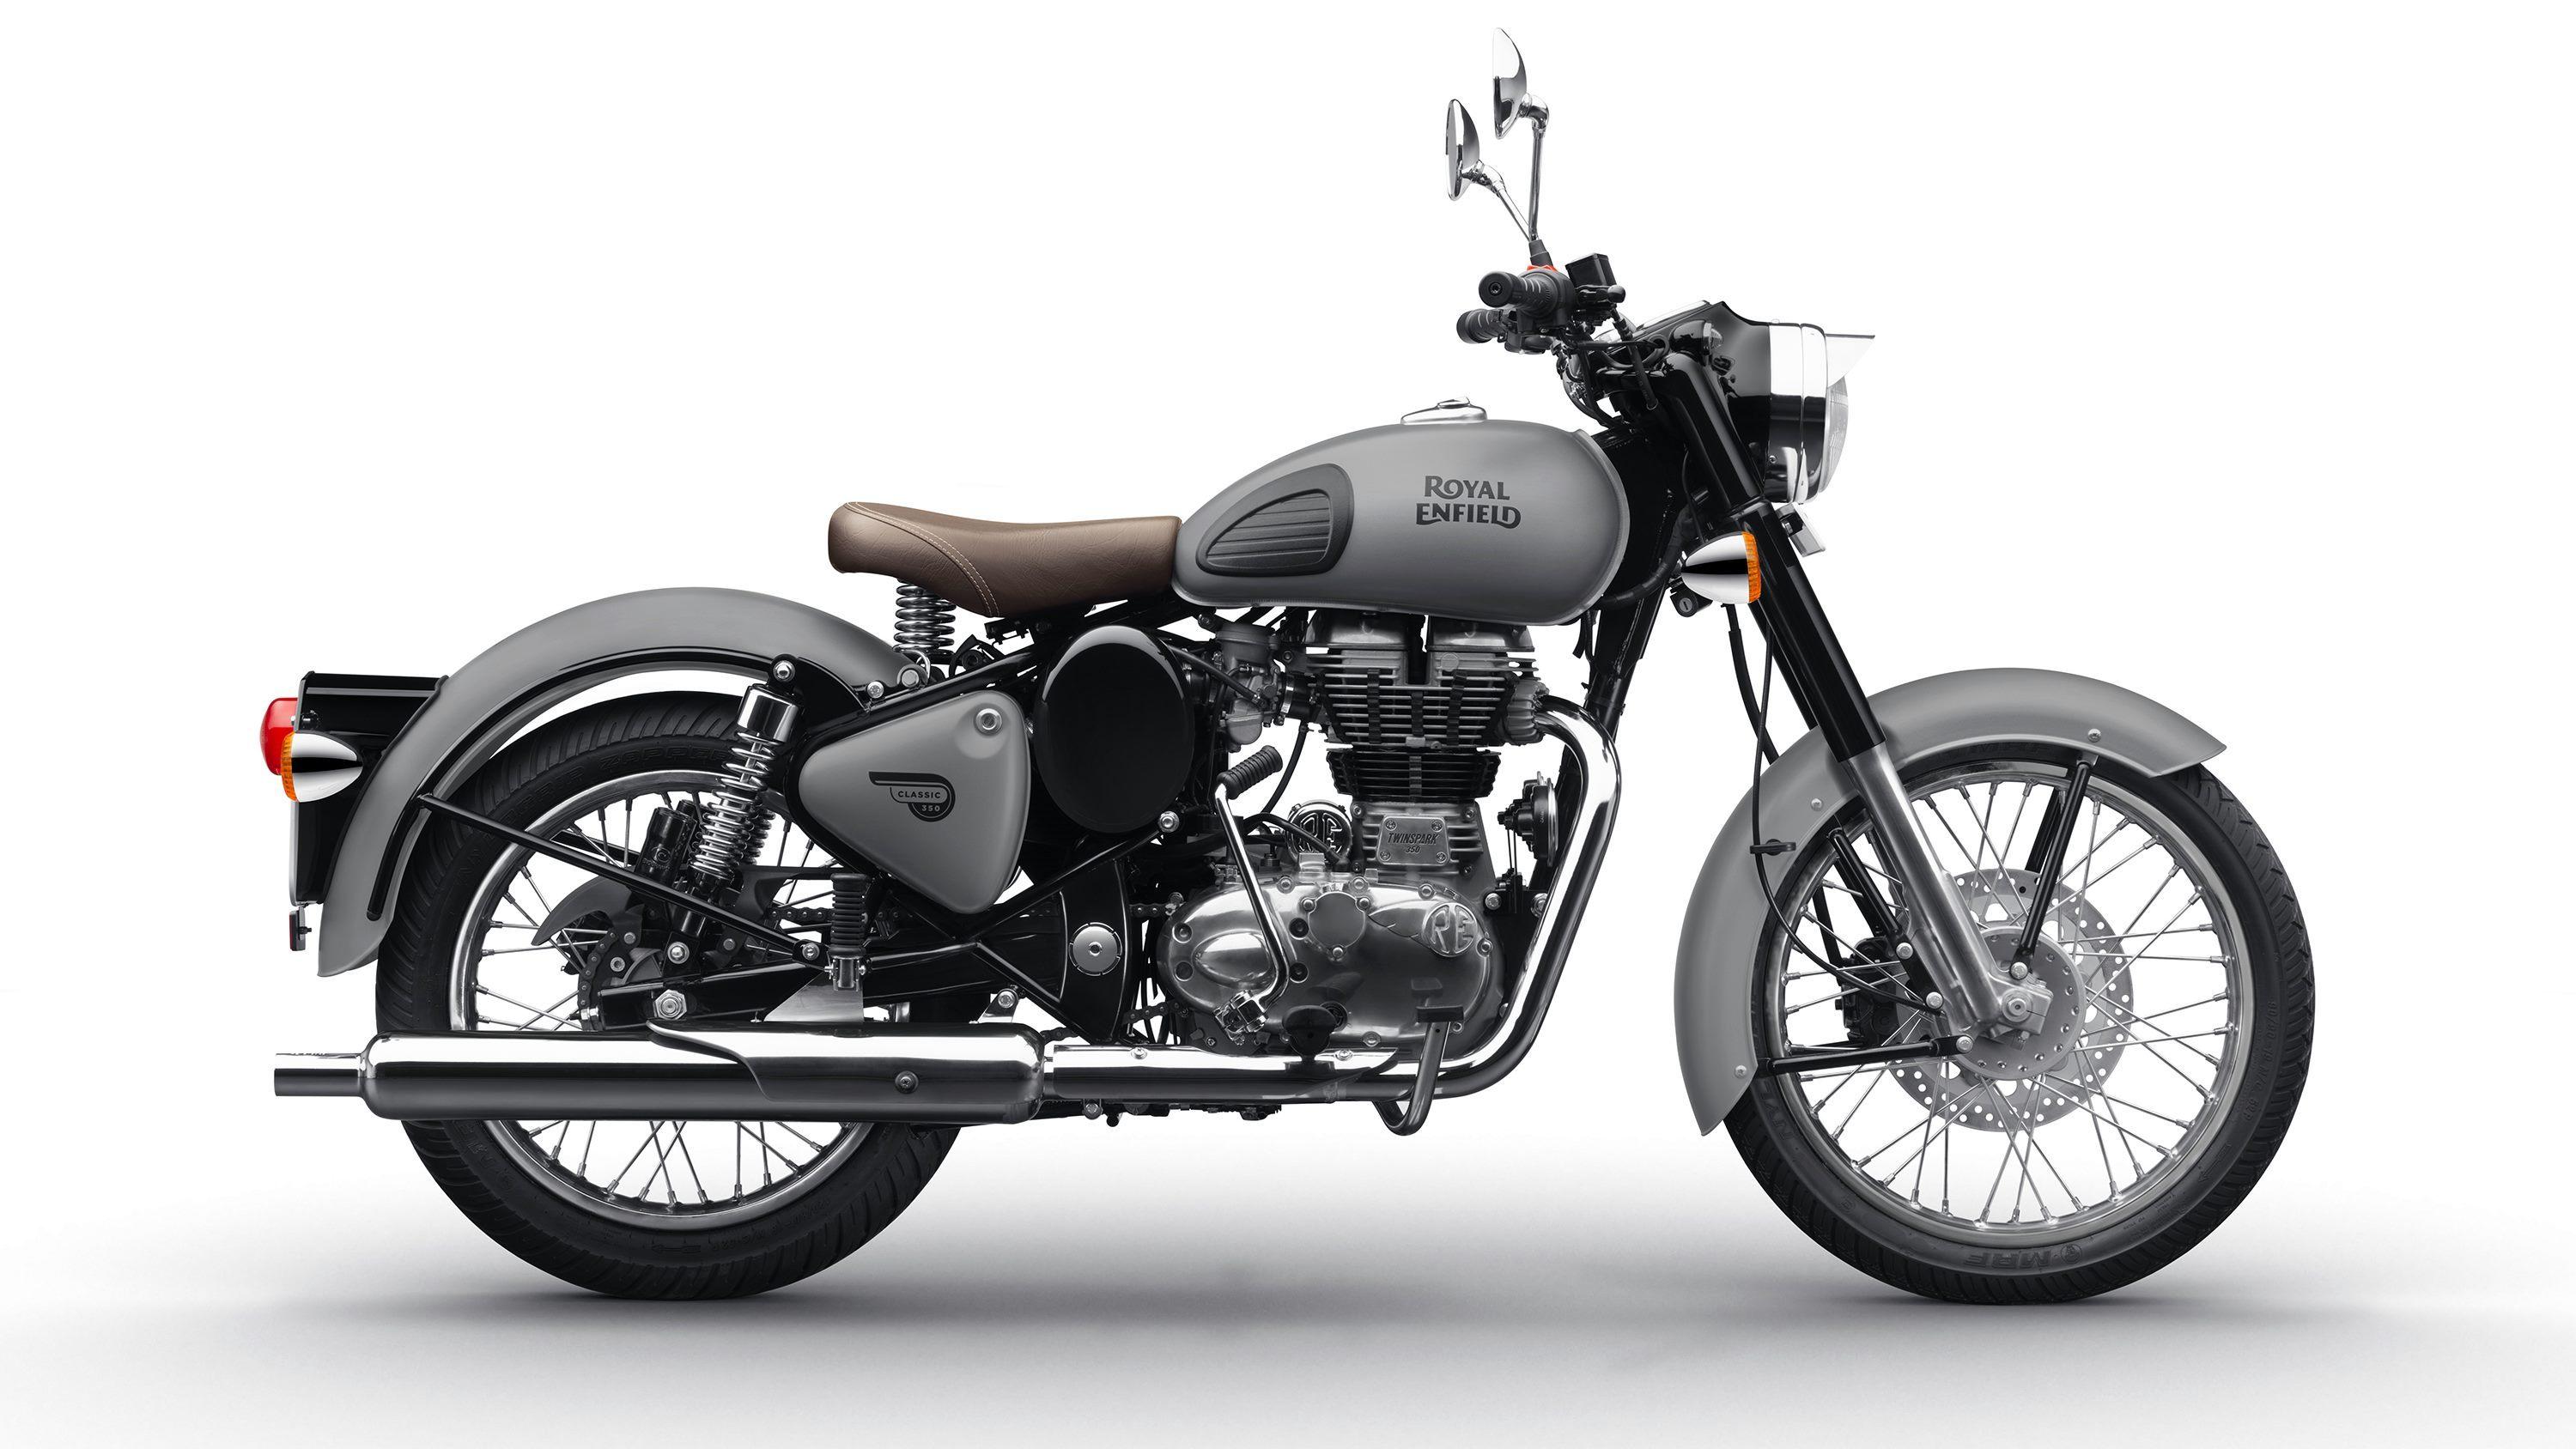 New colour options for Royal Enfield Classic 350 and Classic 500